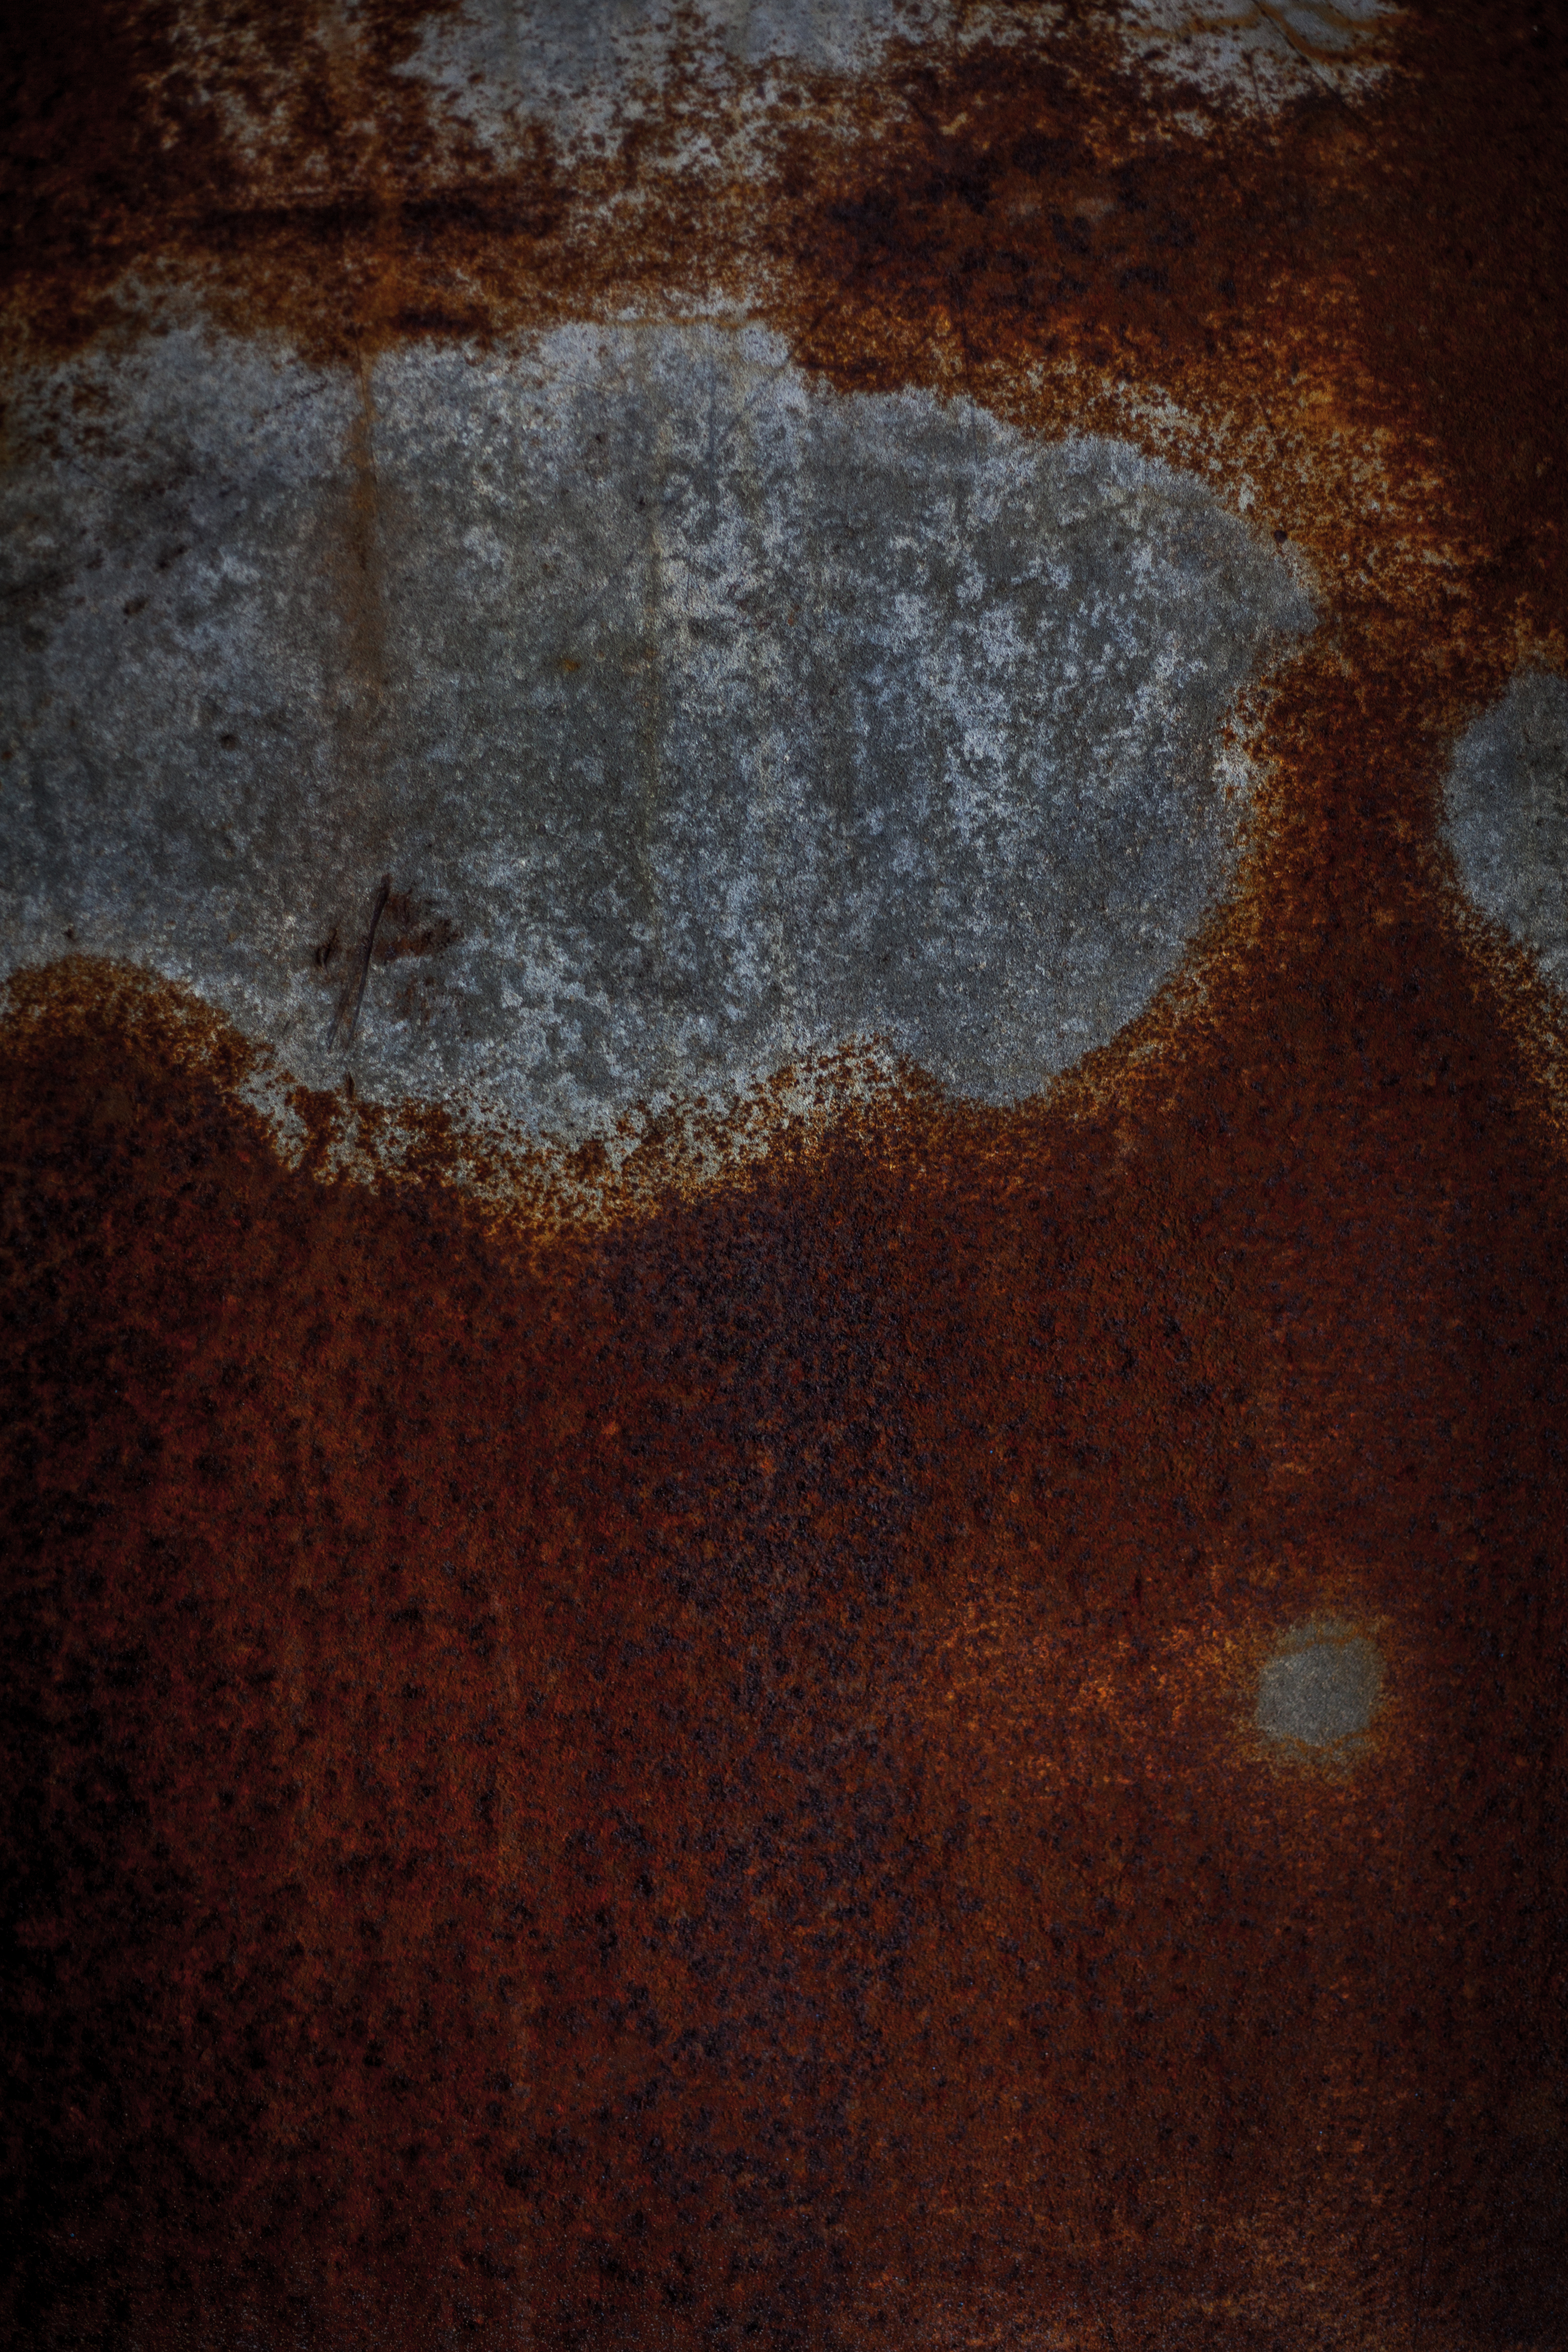 Gritty rust texture photo